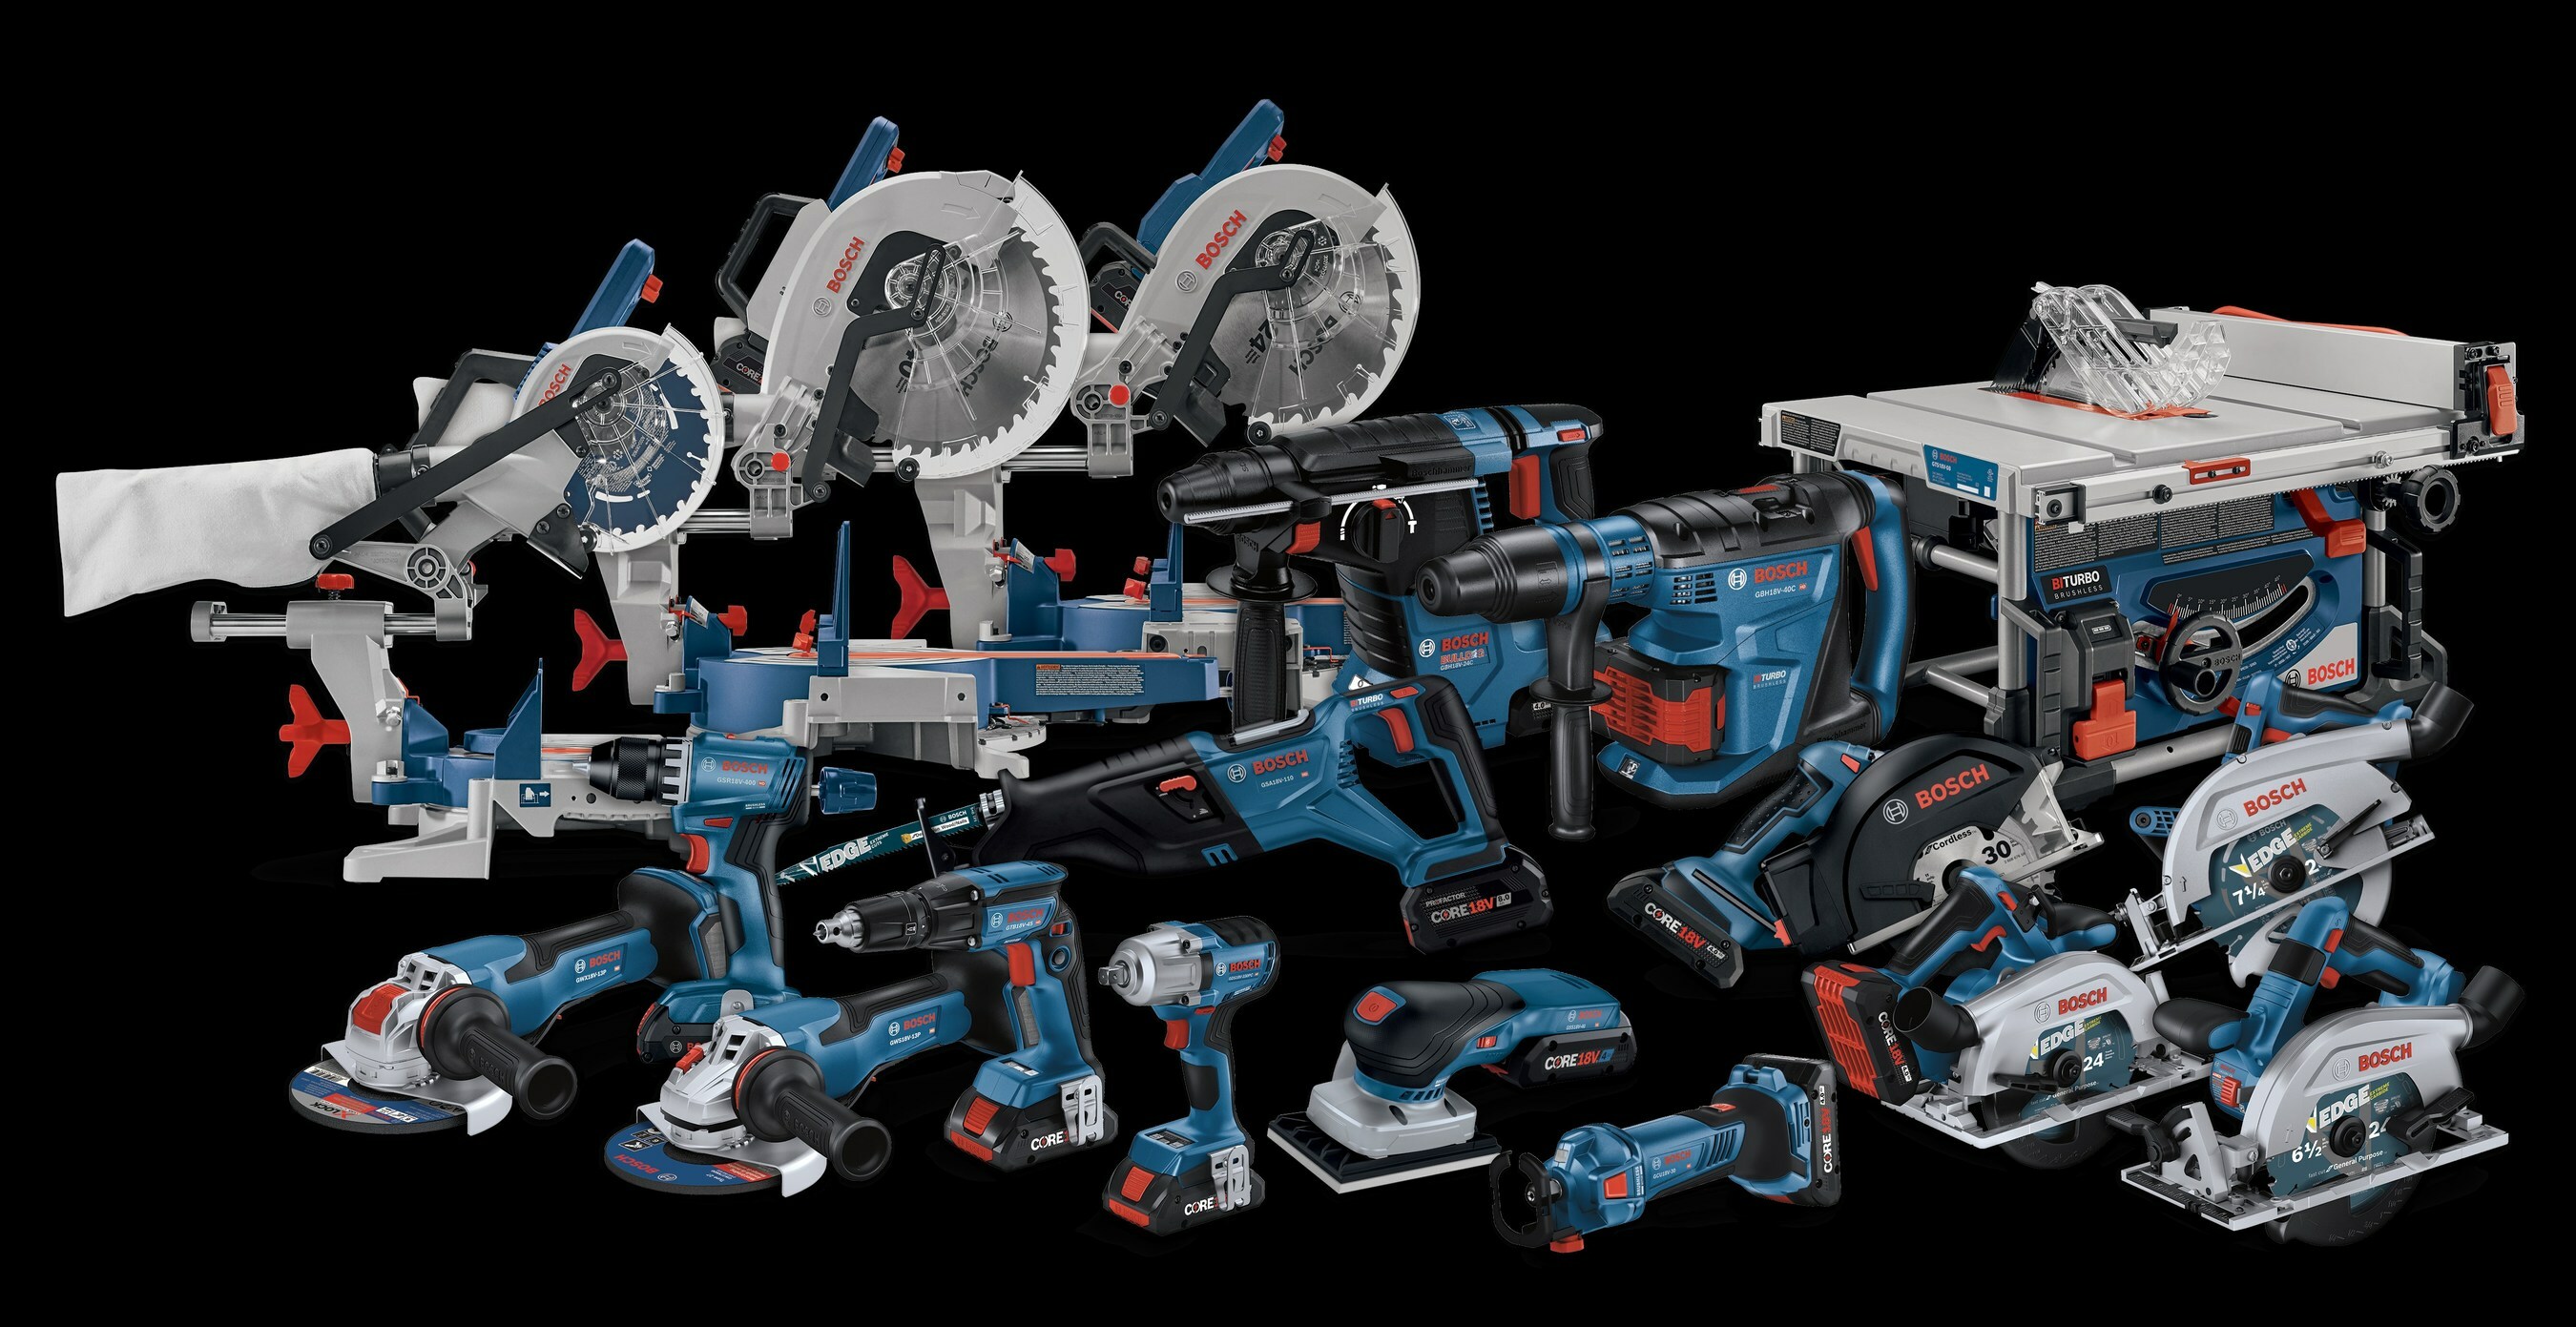 Bosch Enters 2023 Committed to their 18V Battery Platform, Announcing 32  New Cordless Tools Engineered to Tackle the Job - Jan 12, 2023